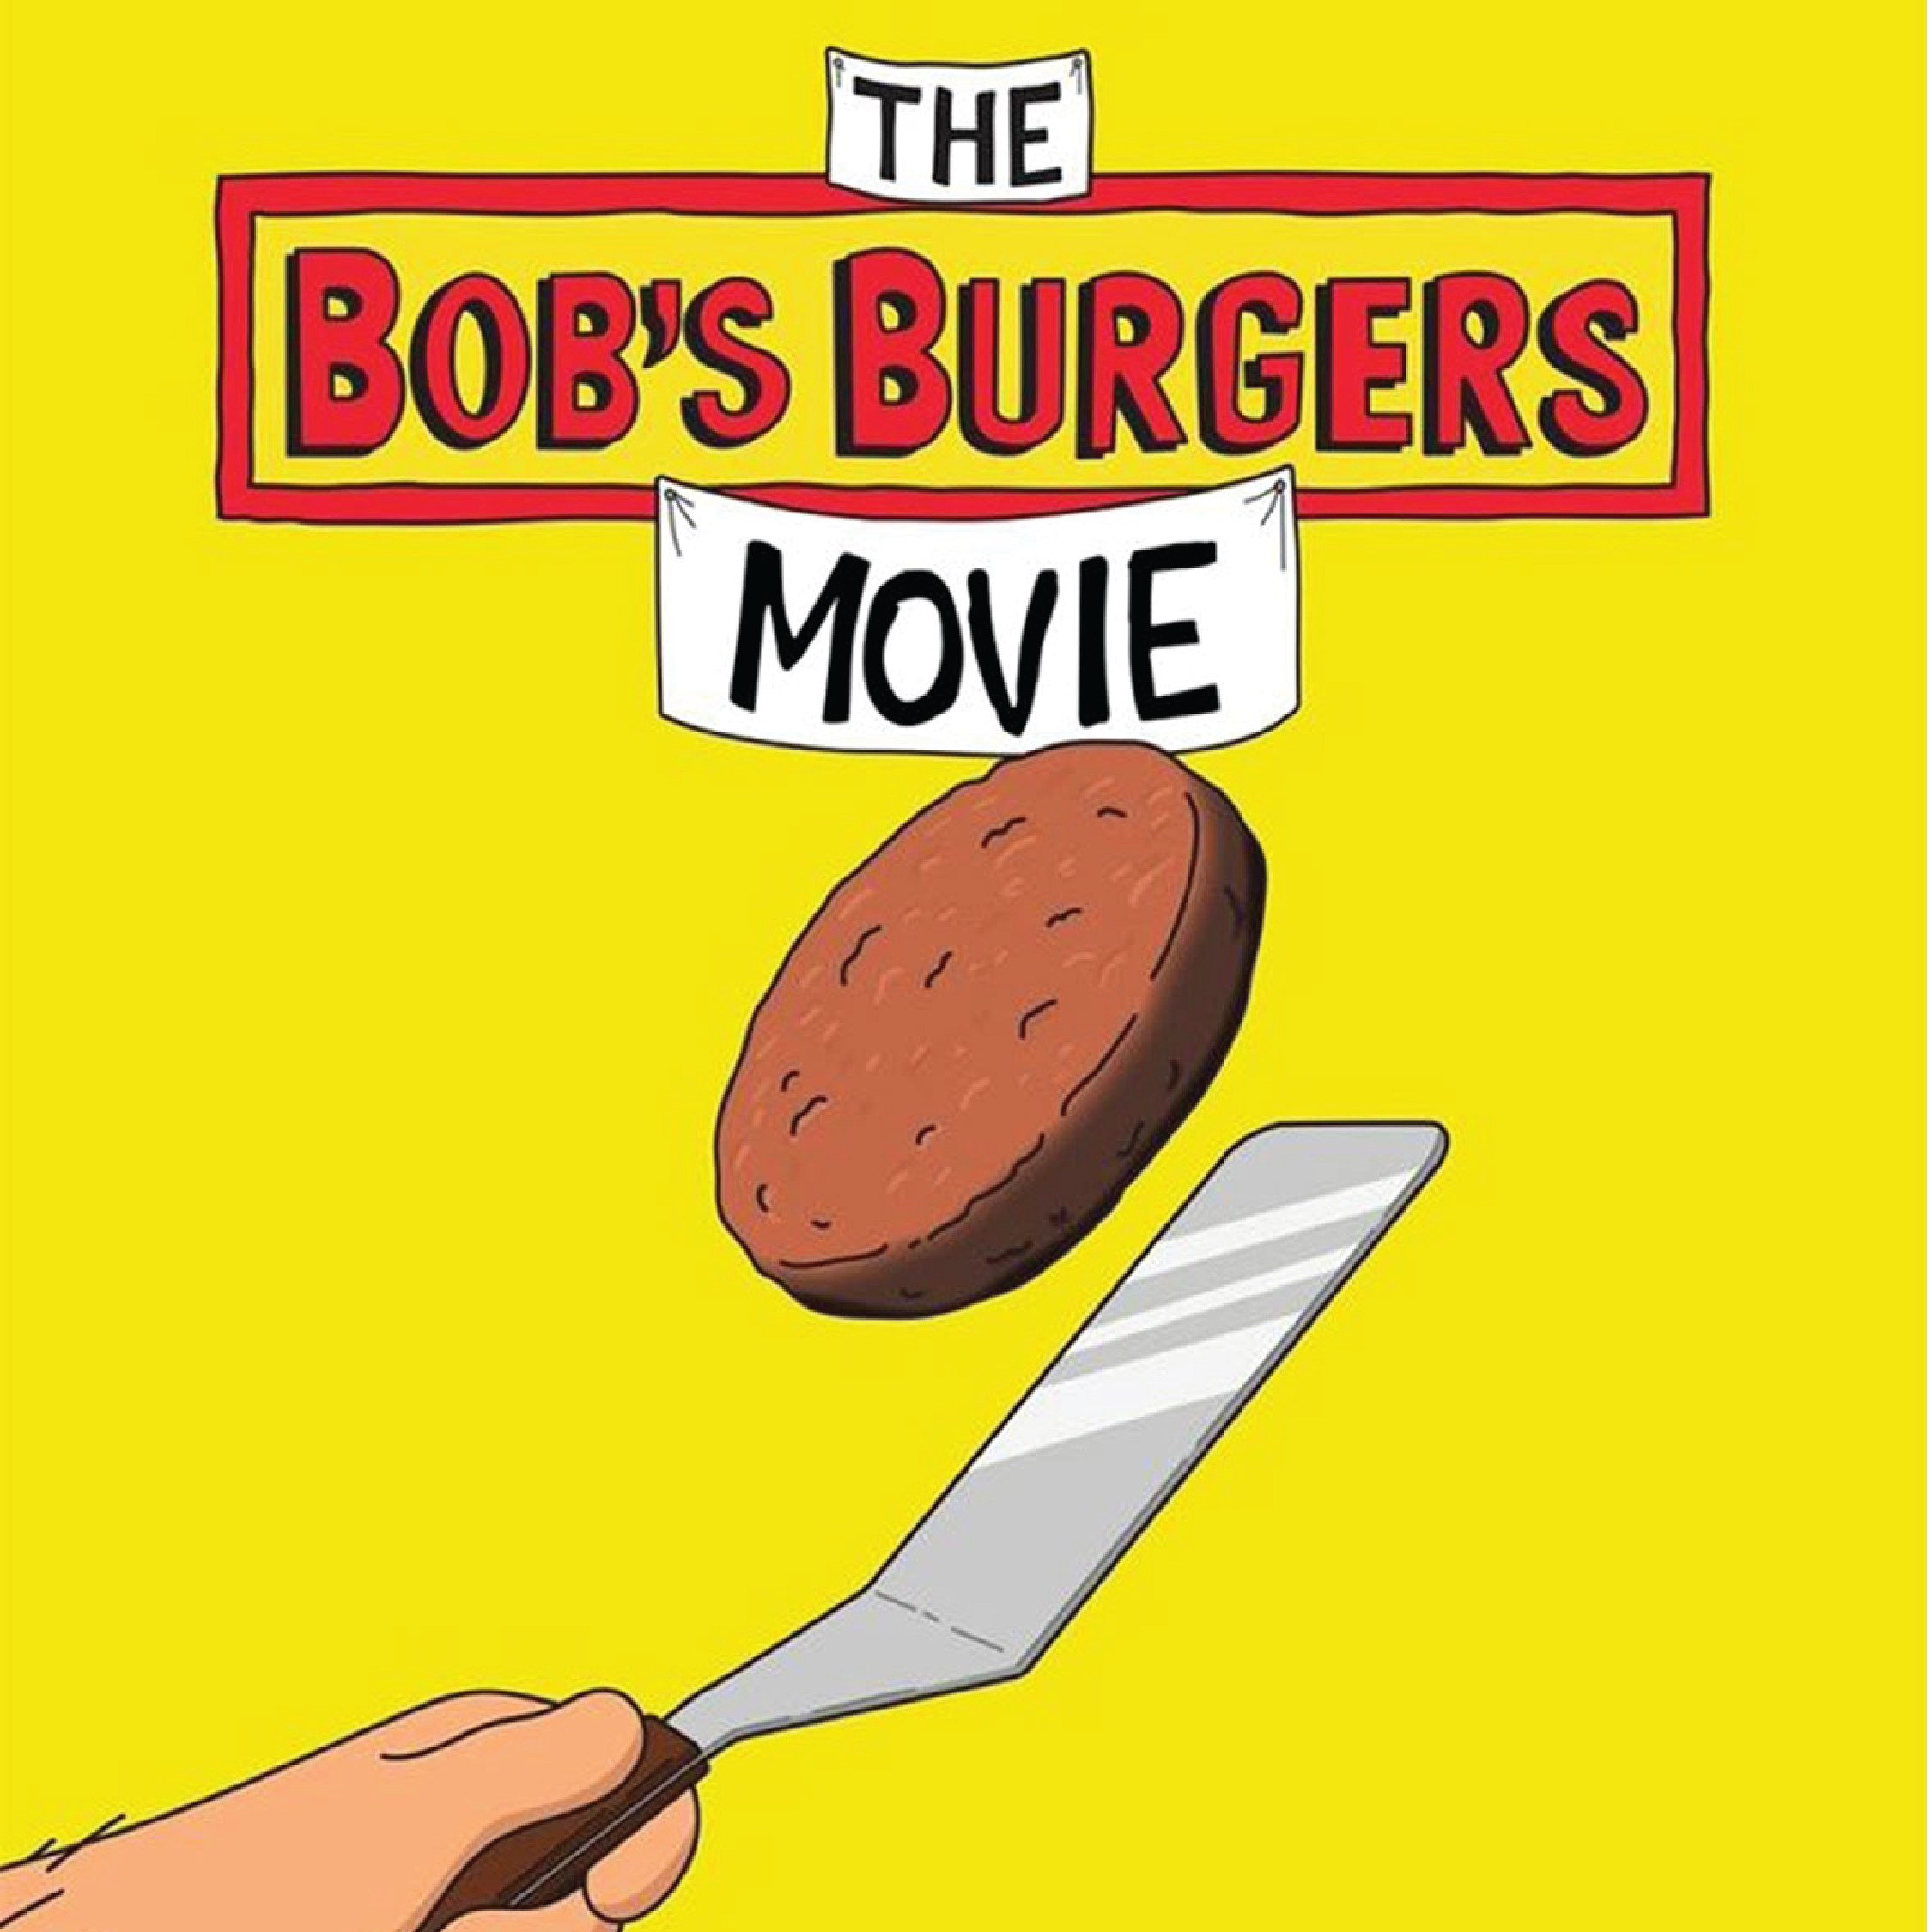 Image of burger flipping in air from Bob's Burgers